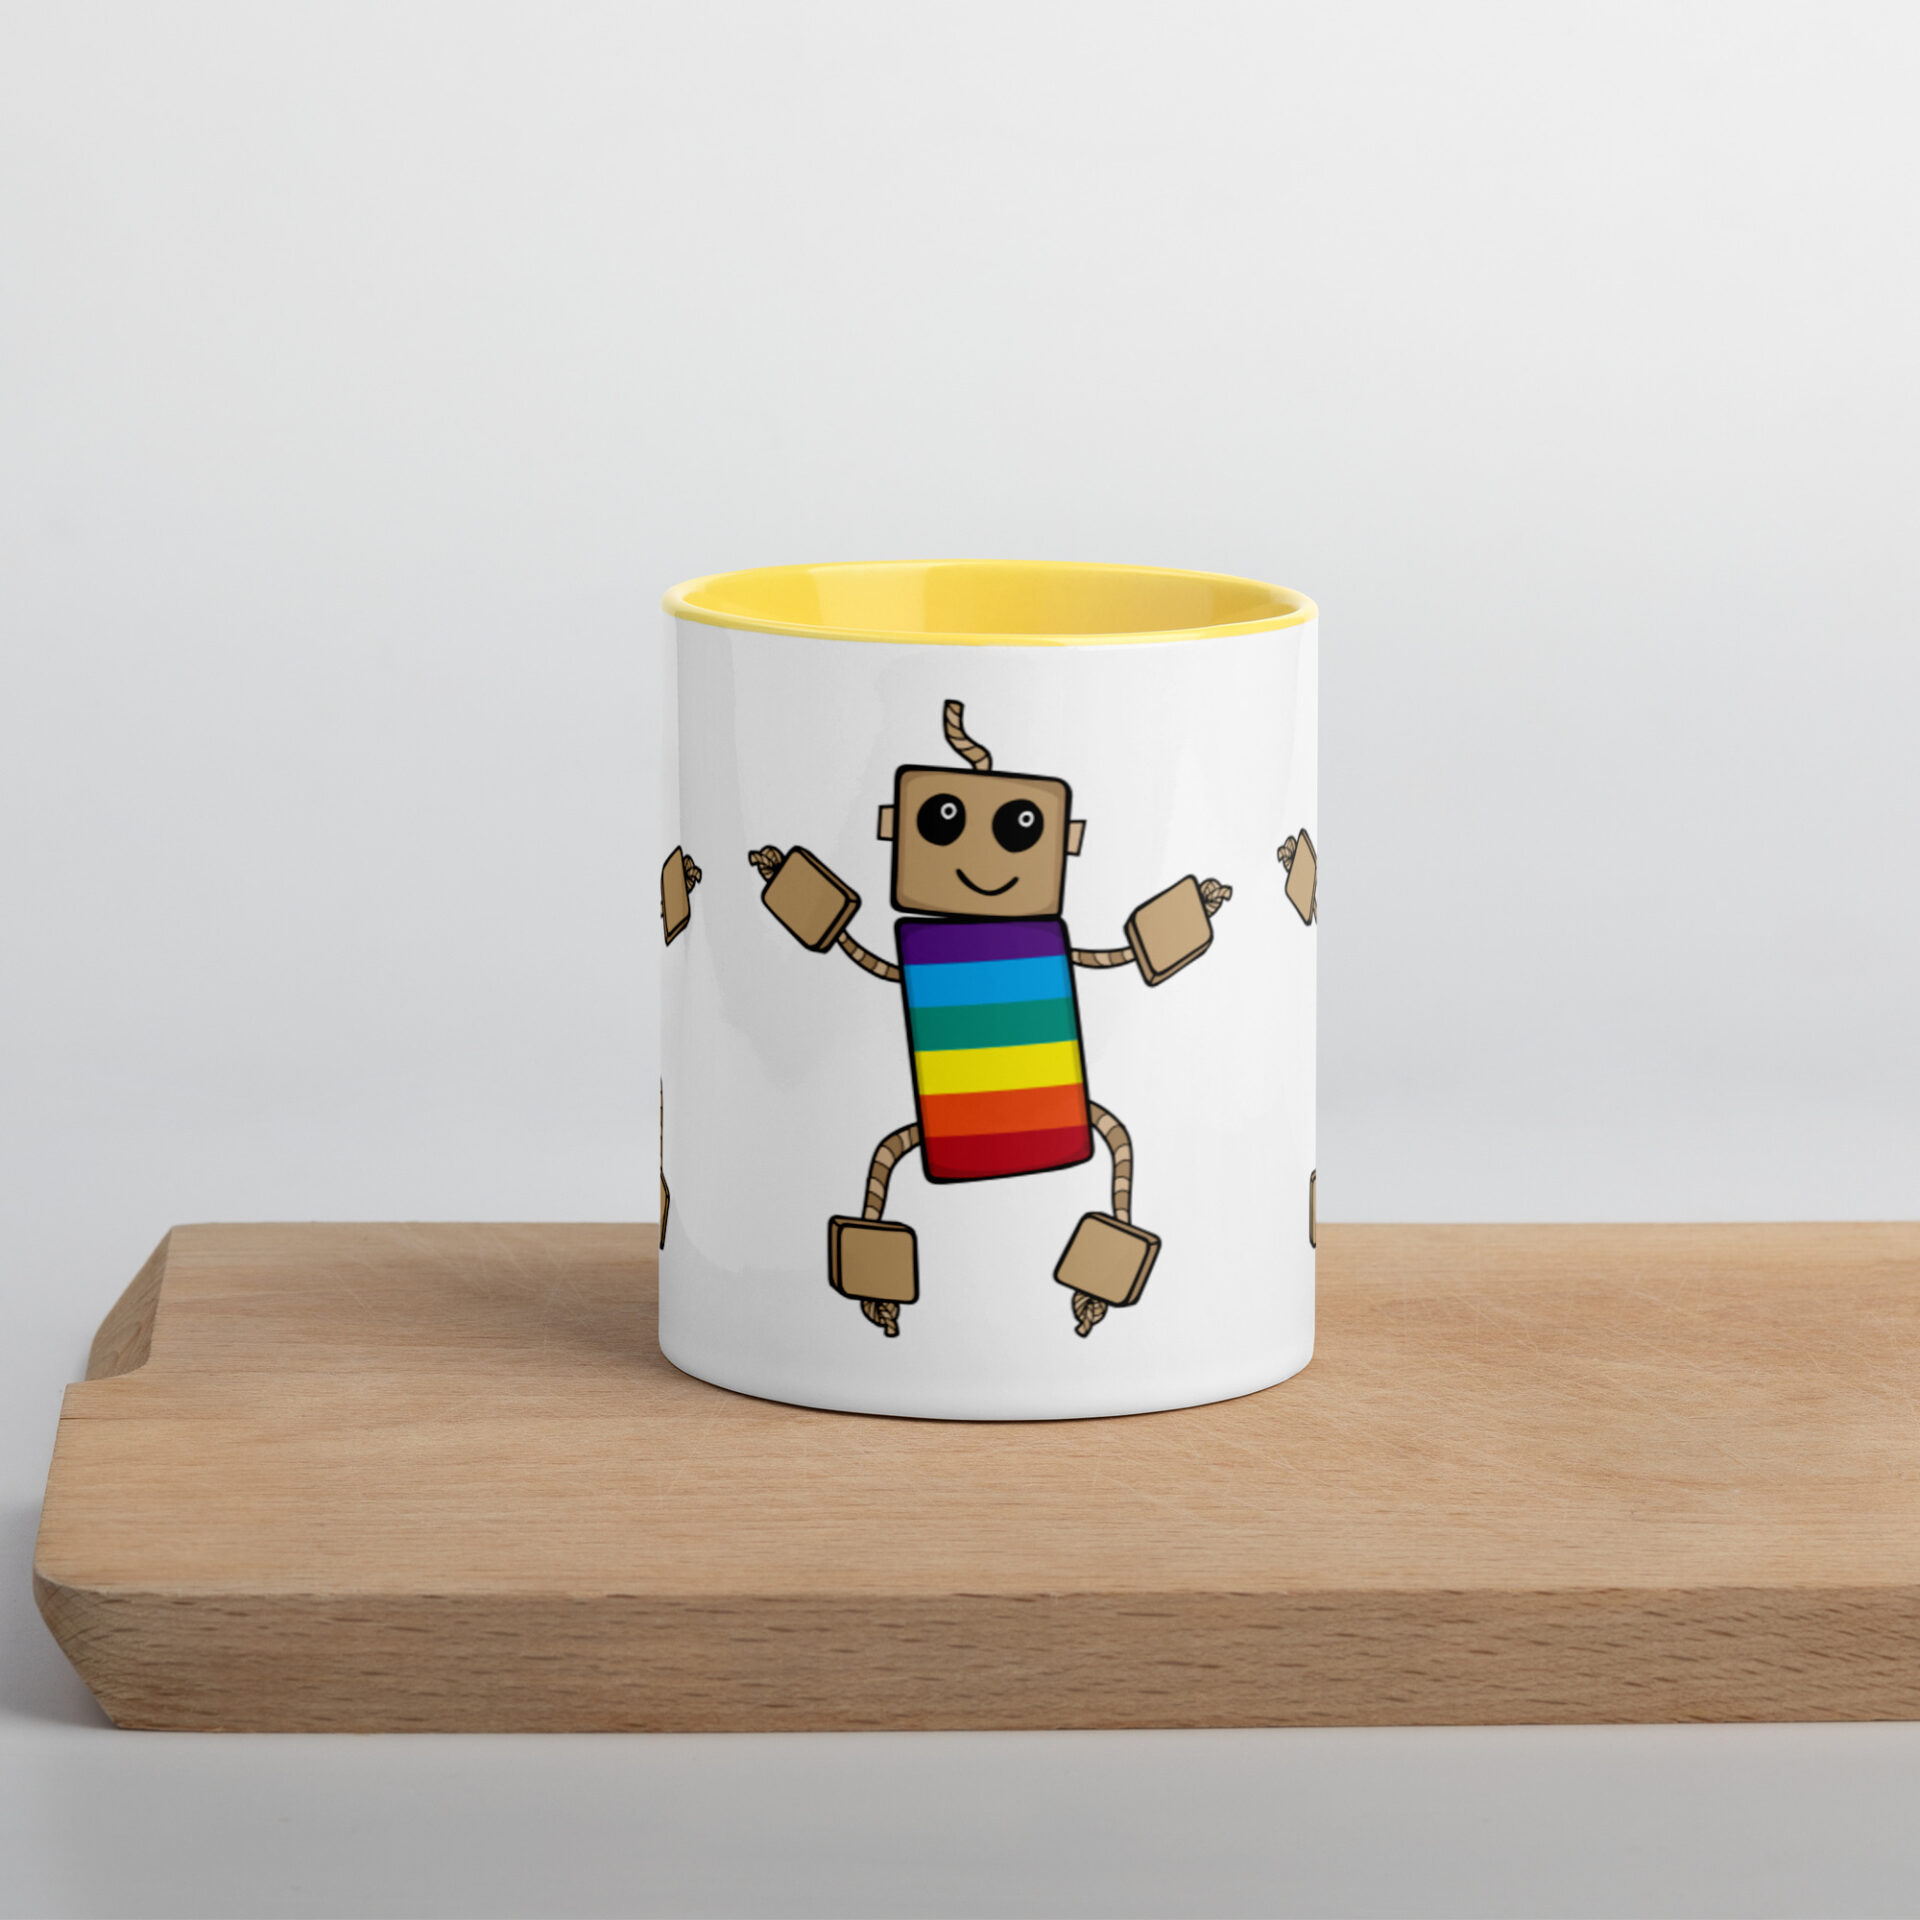 white mug with yellow inside and rainbow ned printed on the outside